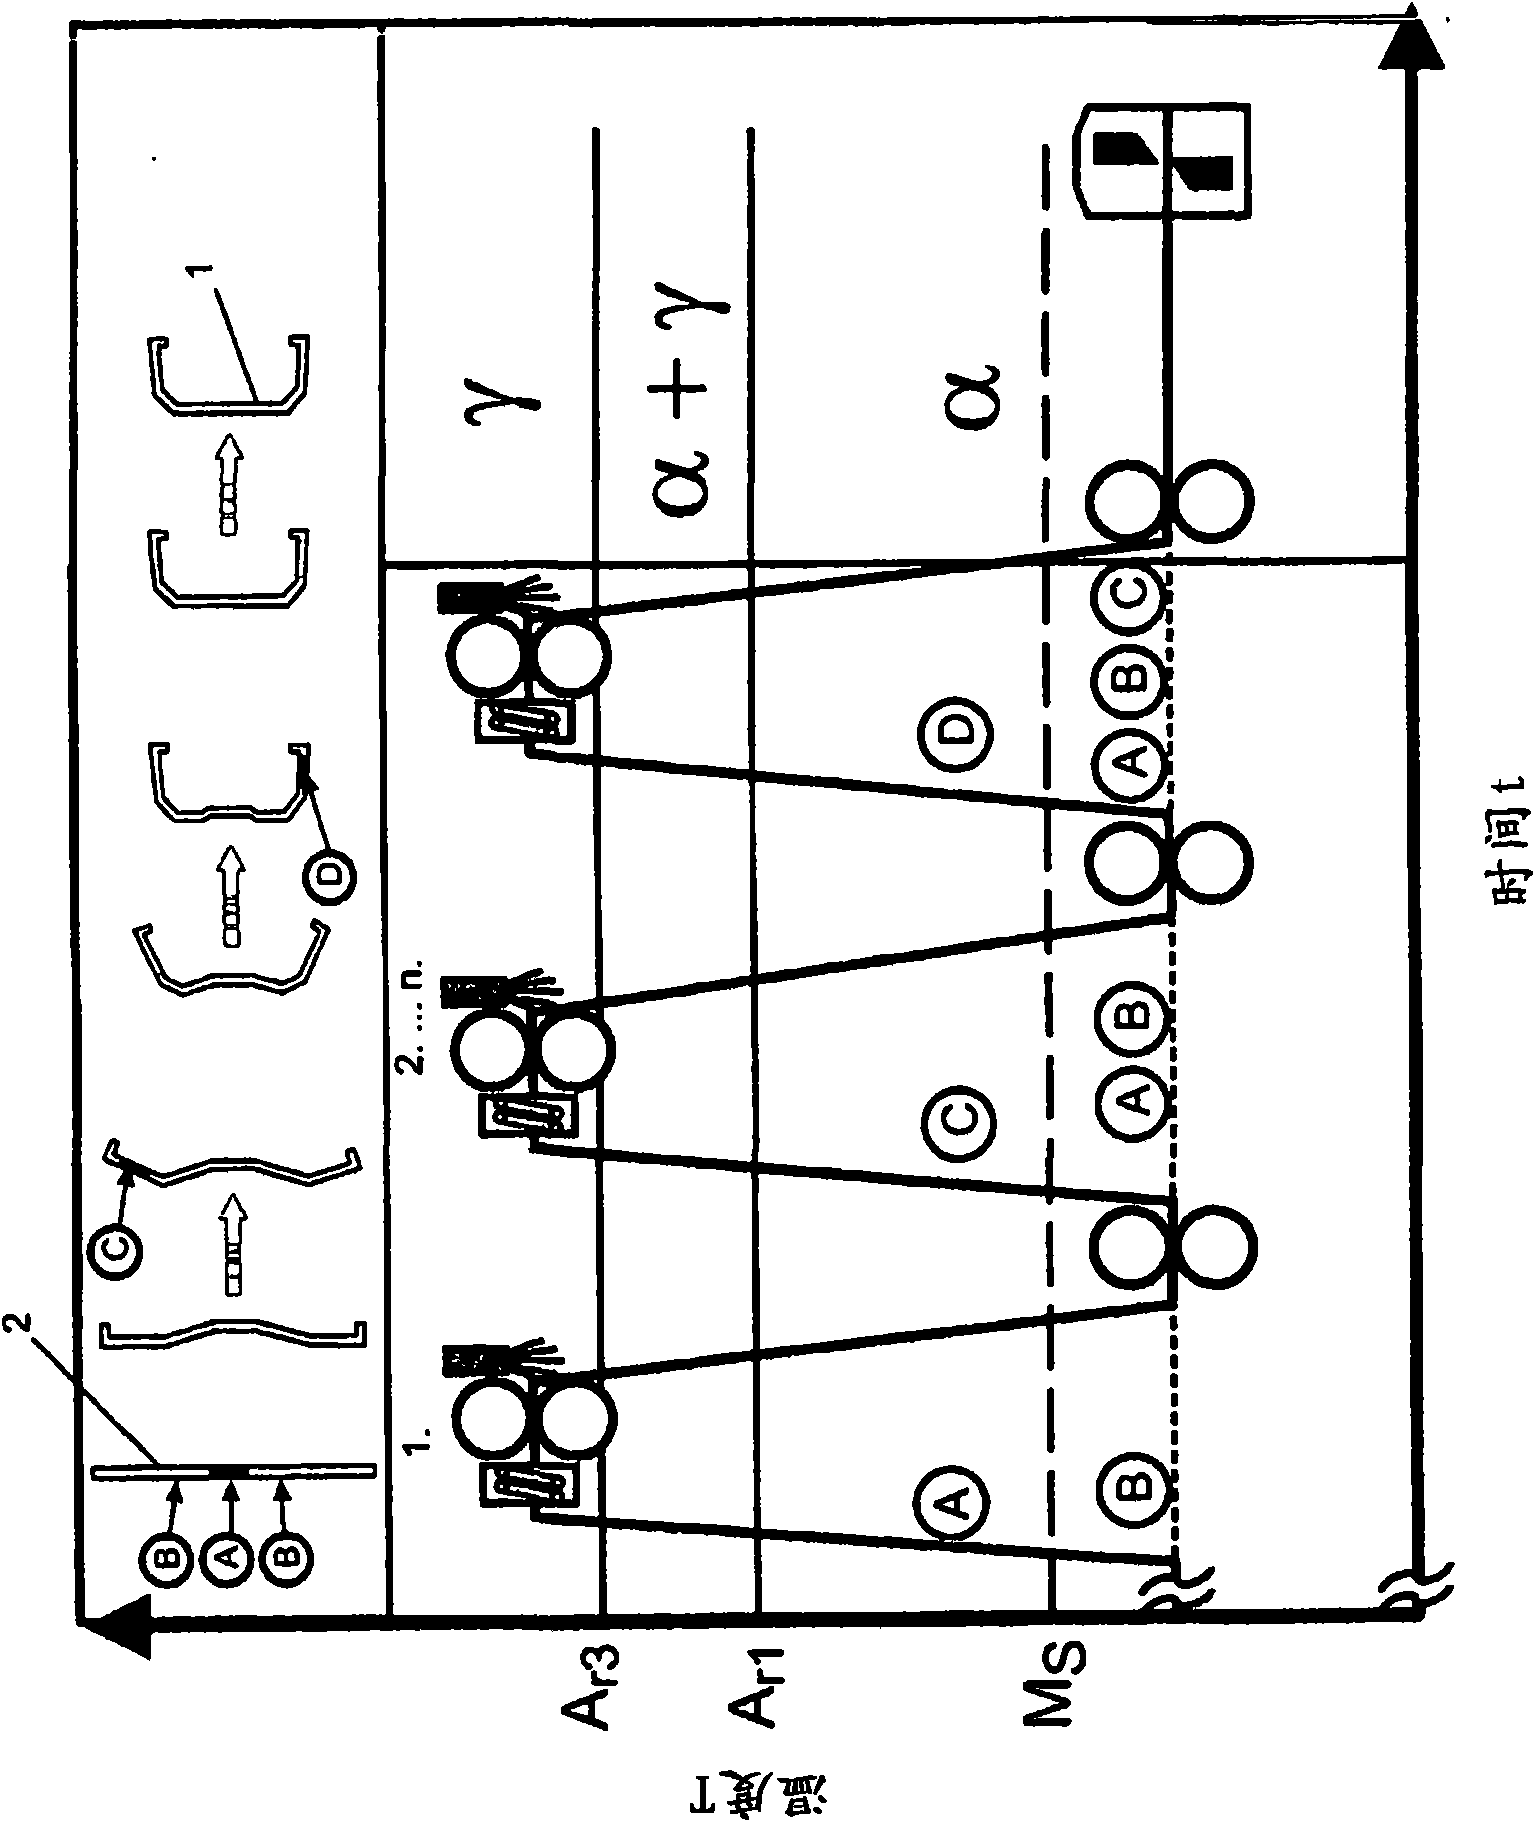 Process for producing a locally hardened profile component, locally hardened profile component and use of a locally hardened profile component